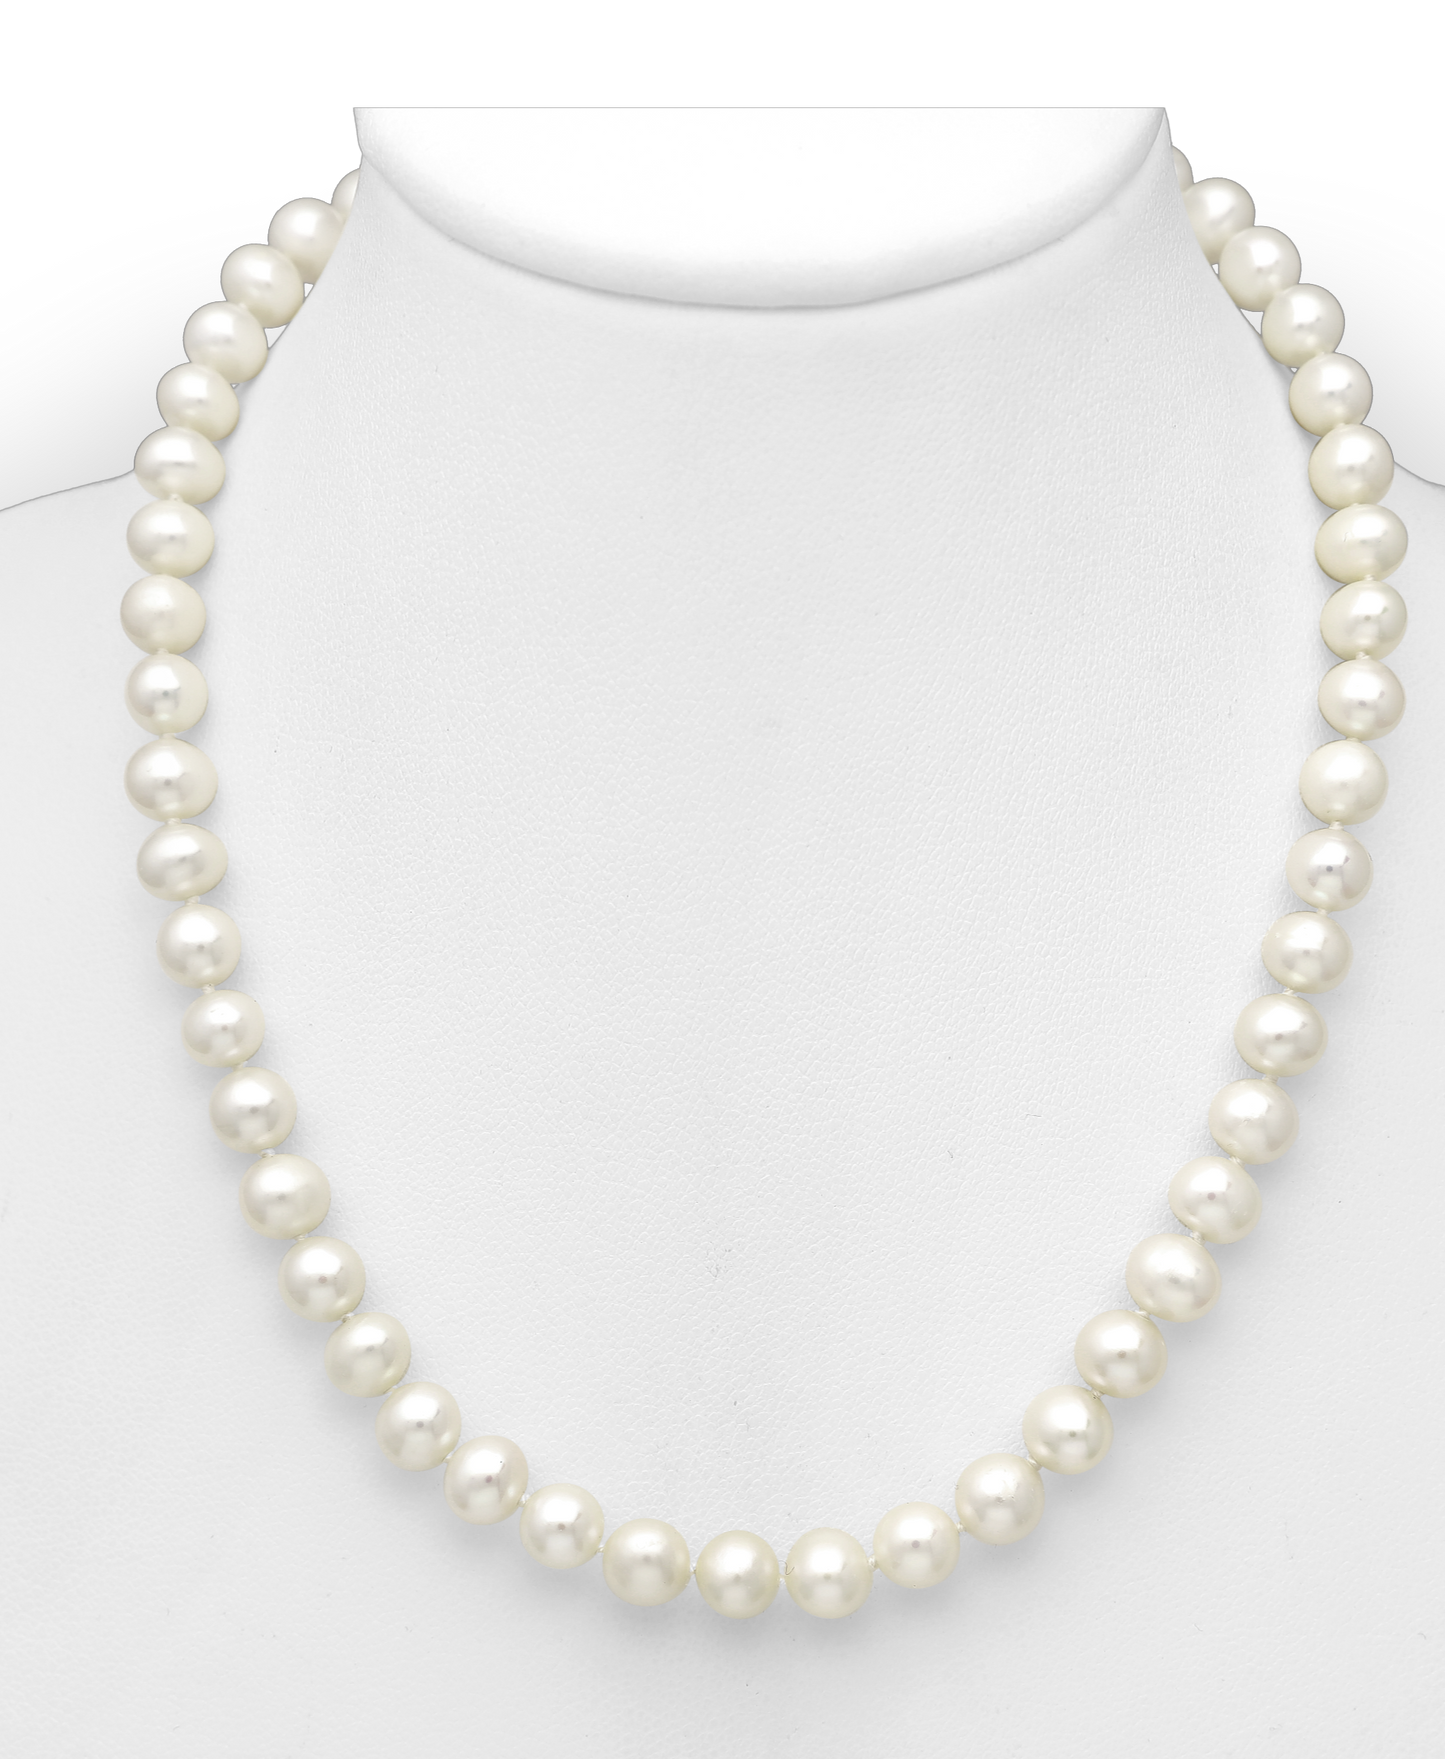 AA Freshwater Pearl Necklace with a Sterling Silver Clapse